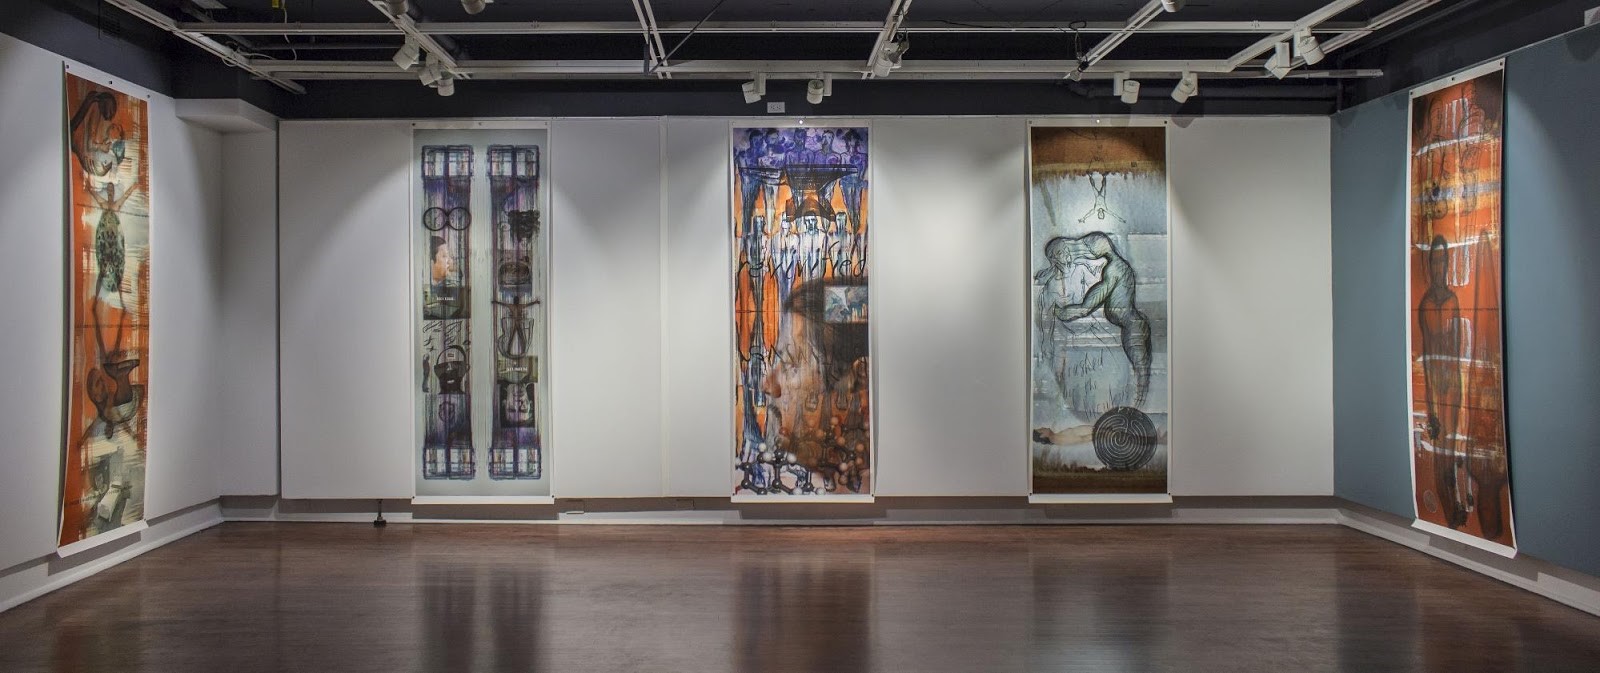 Installation image of hanging delirium scrolls by Andy Fabo 